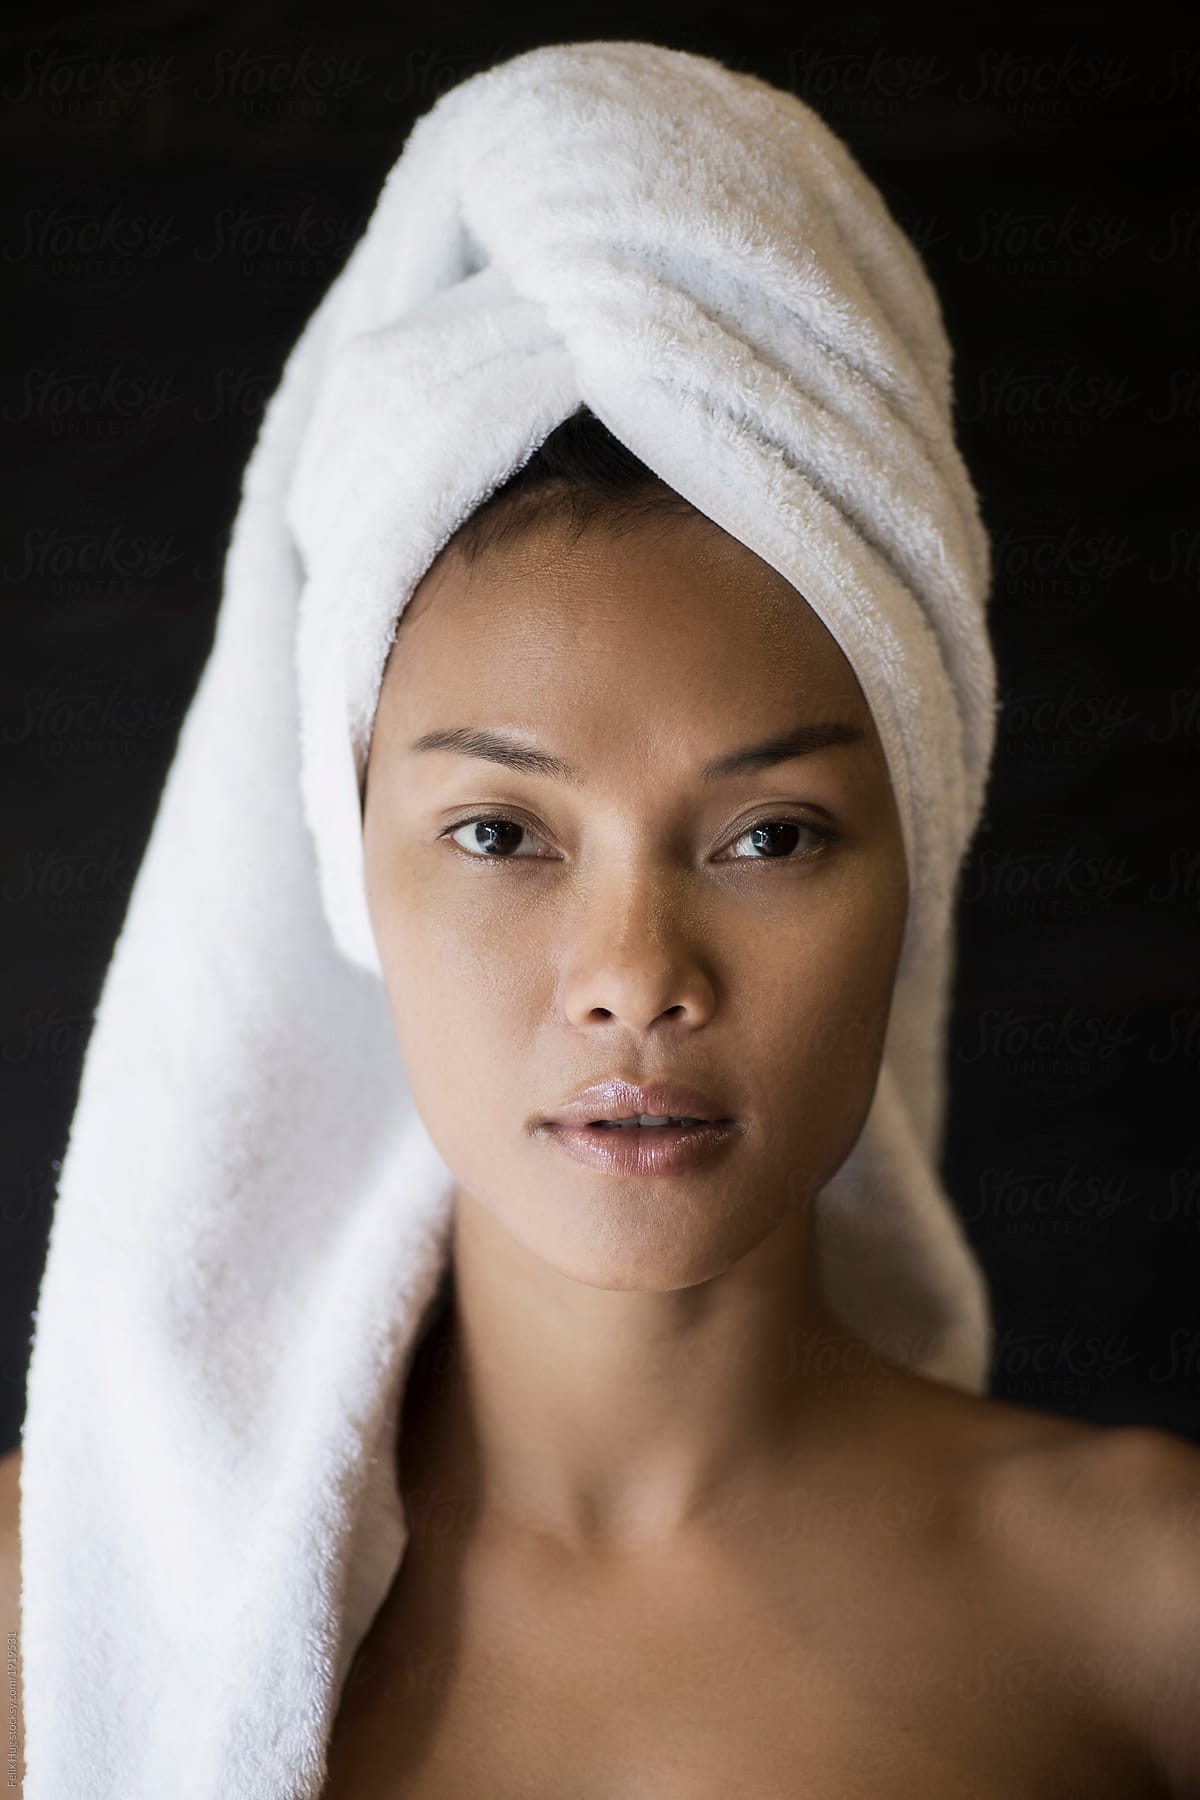 Beauty Image Of An Asian Woman Wearing A White Towel In A Balinese Spa By Stocksy Contributor